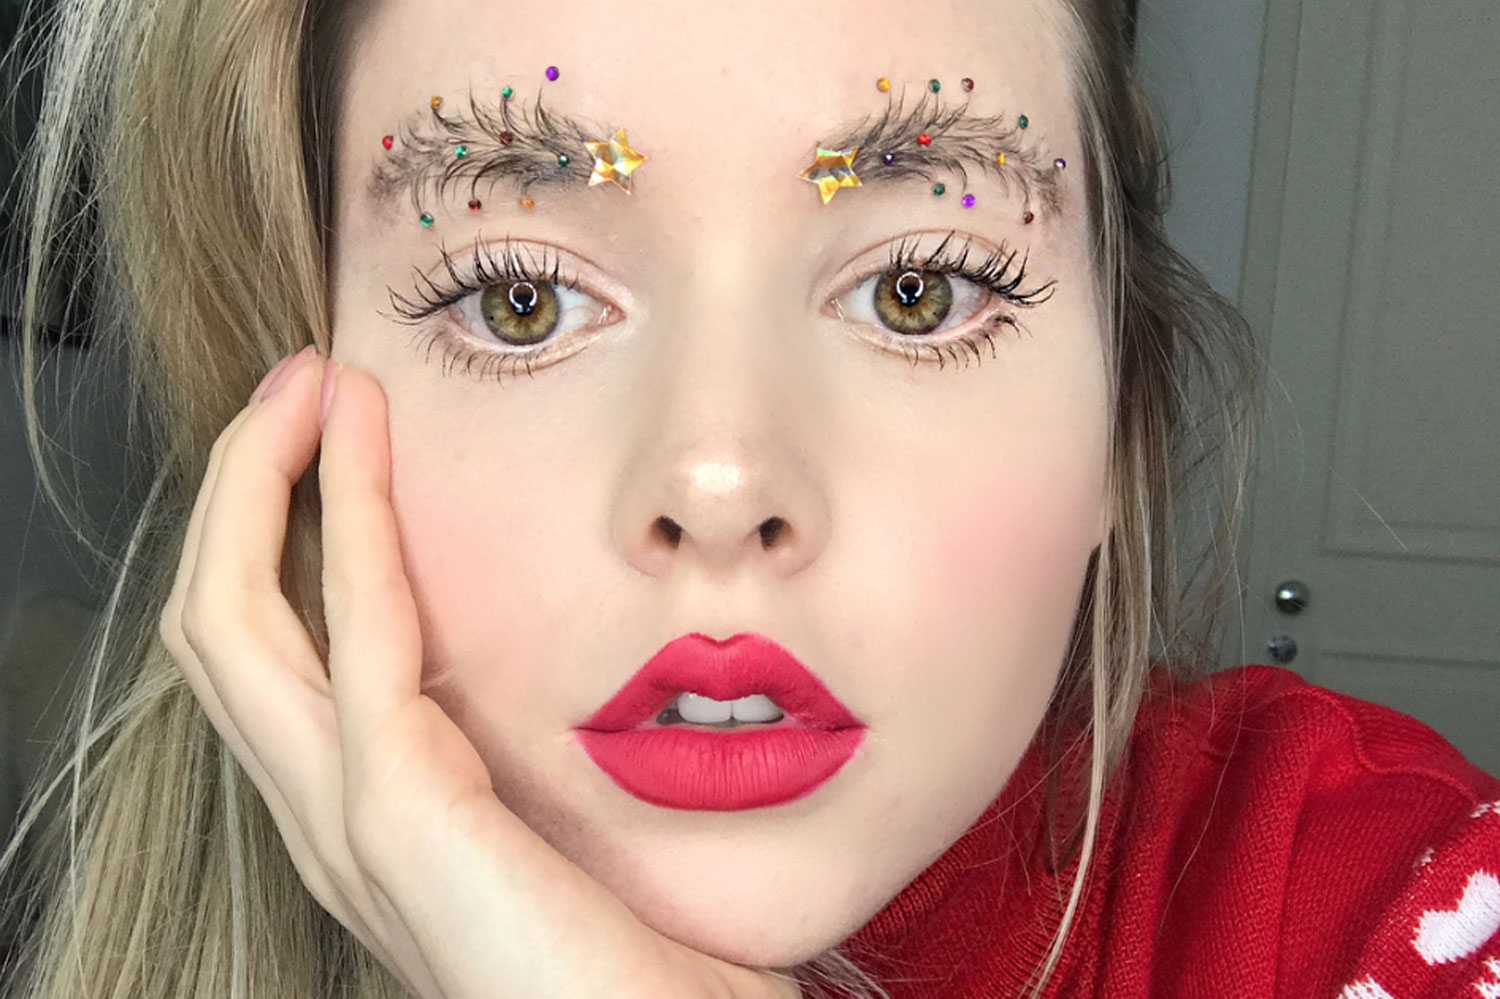 Christmas Tree Eyebrows Are The Trend (Once Again) Taking Over Instagram